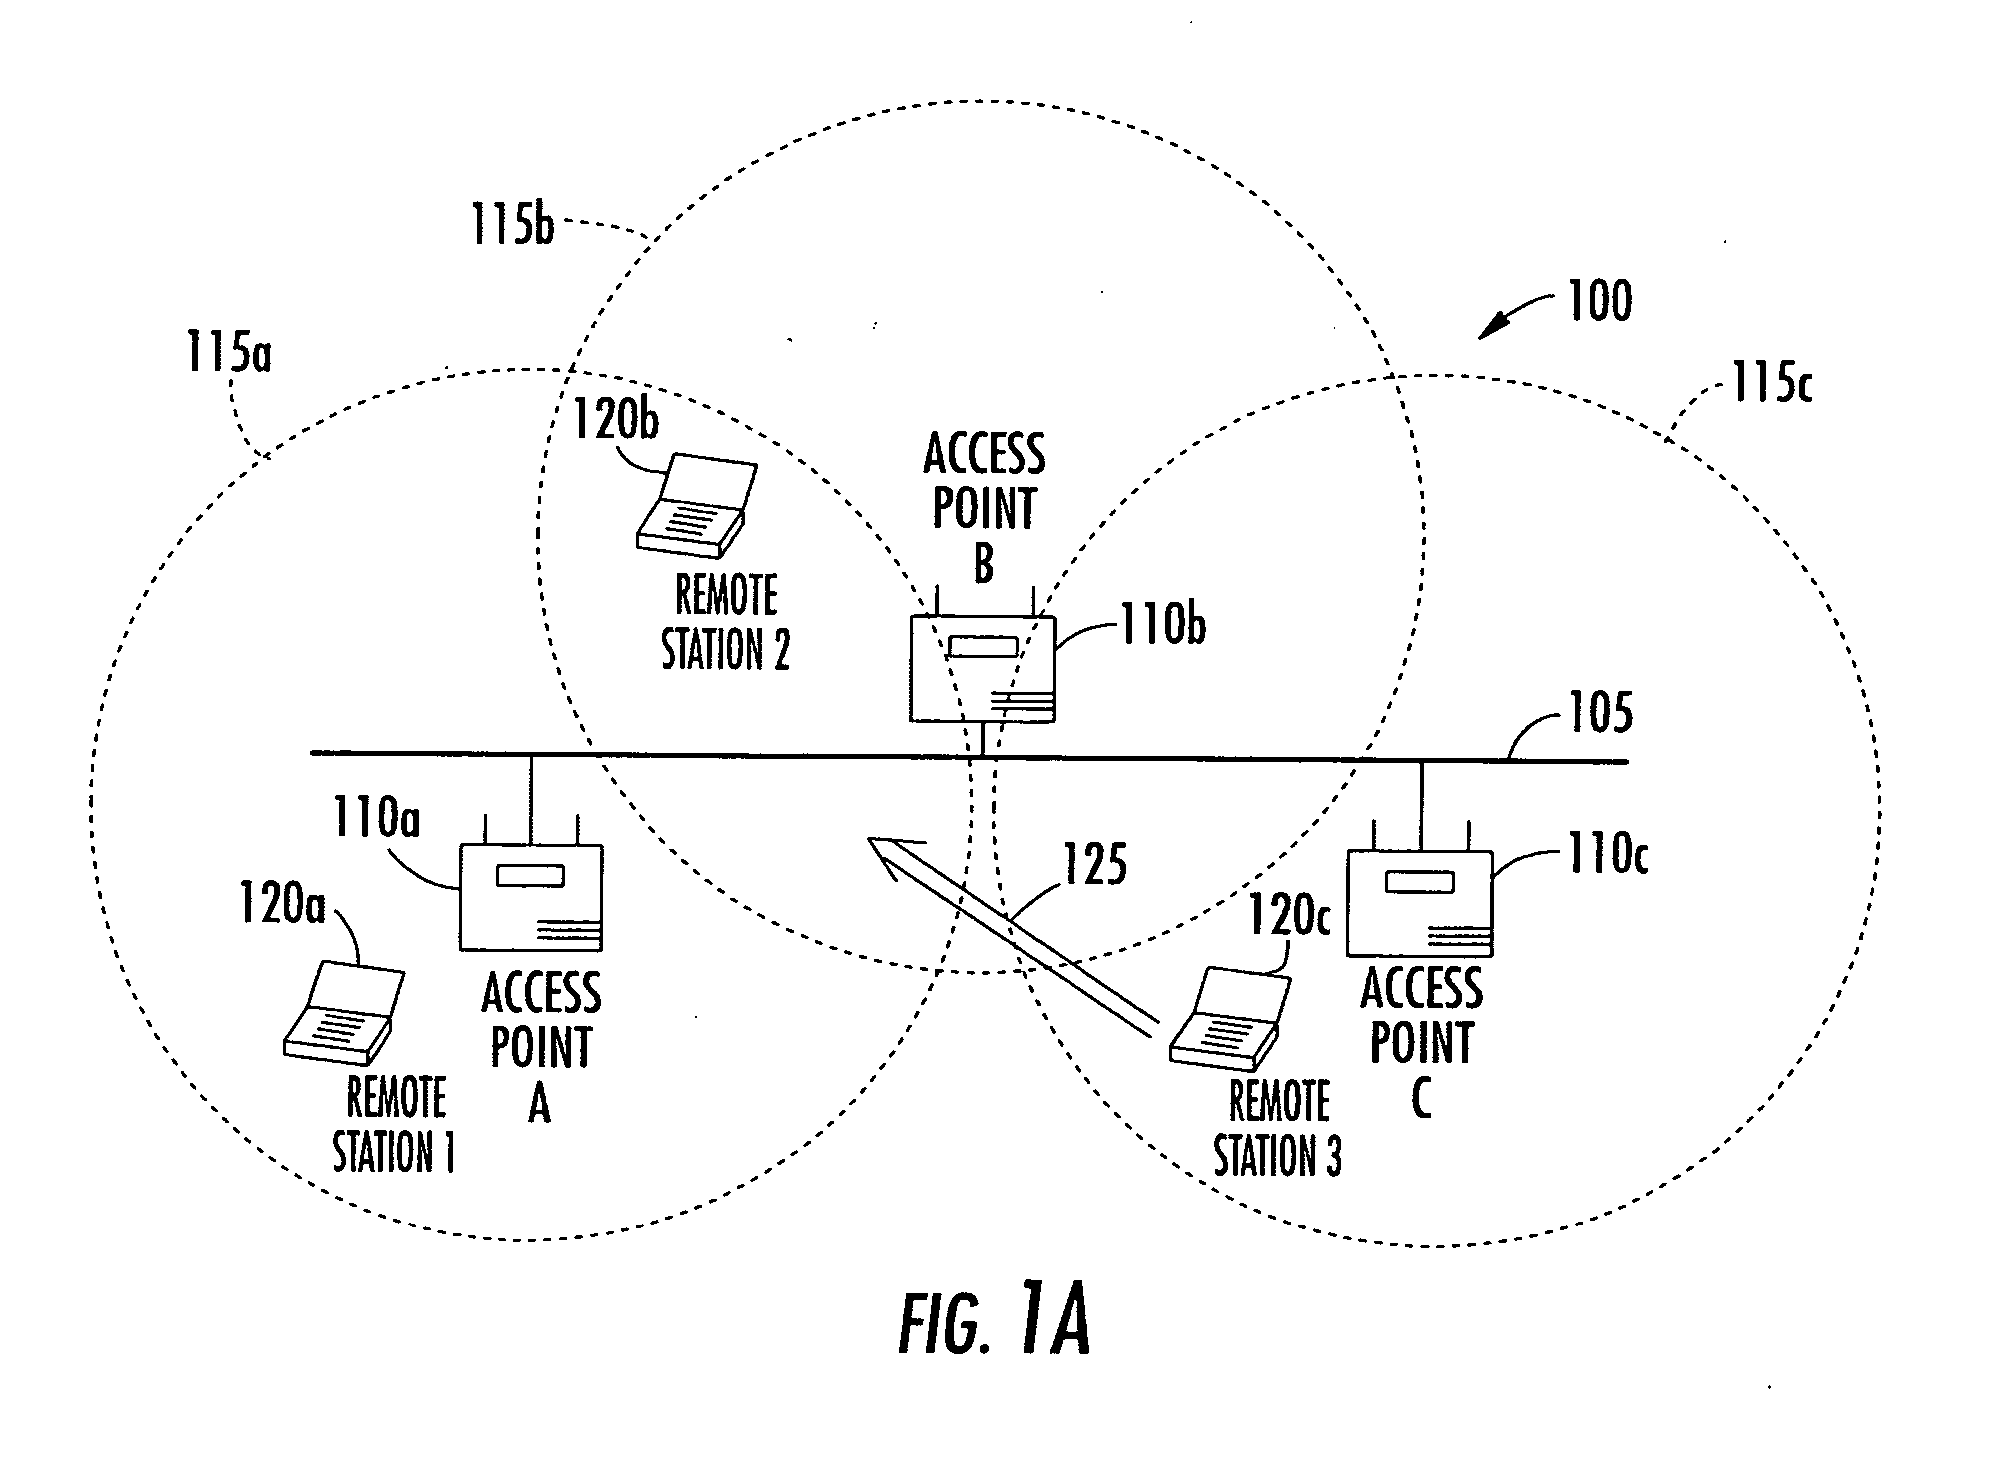 Antenna steering for an access point based upon probe signals